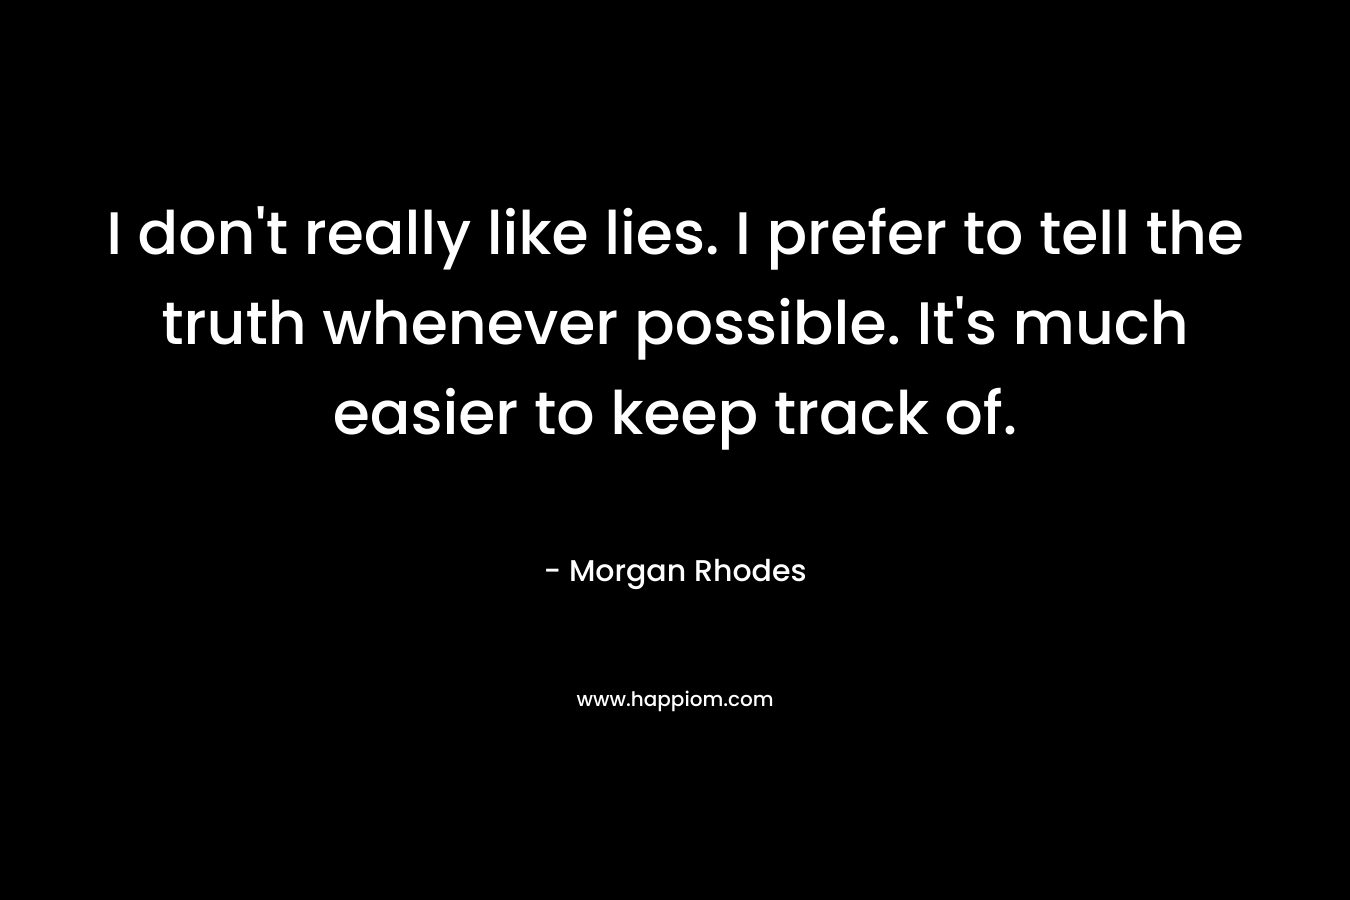 I don't really like lies. I prefer to tell the truth whenever possible. It's much easier to keep track of.